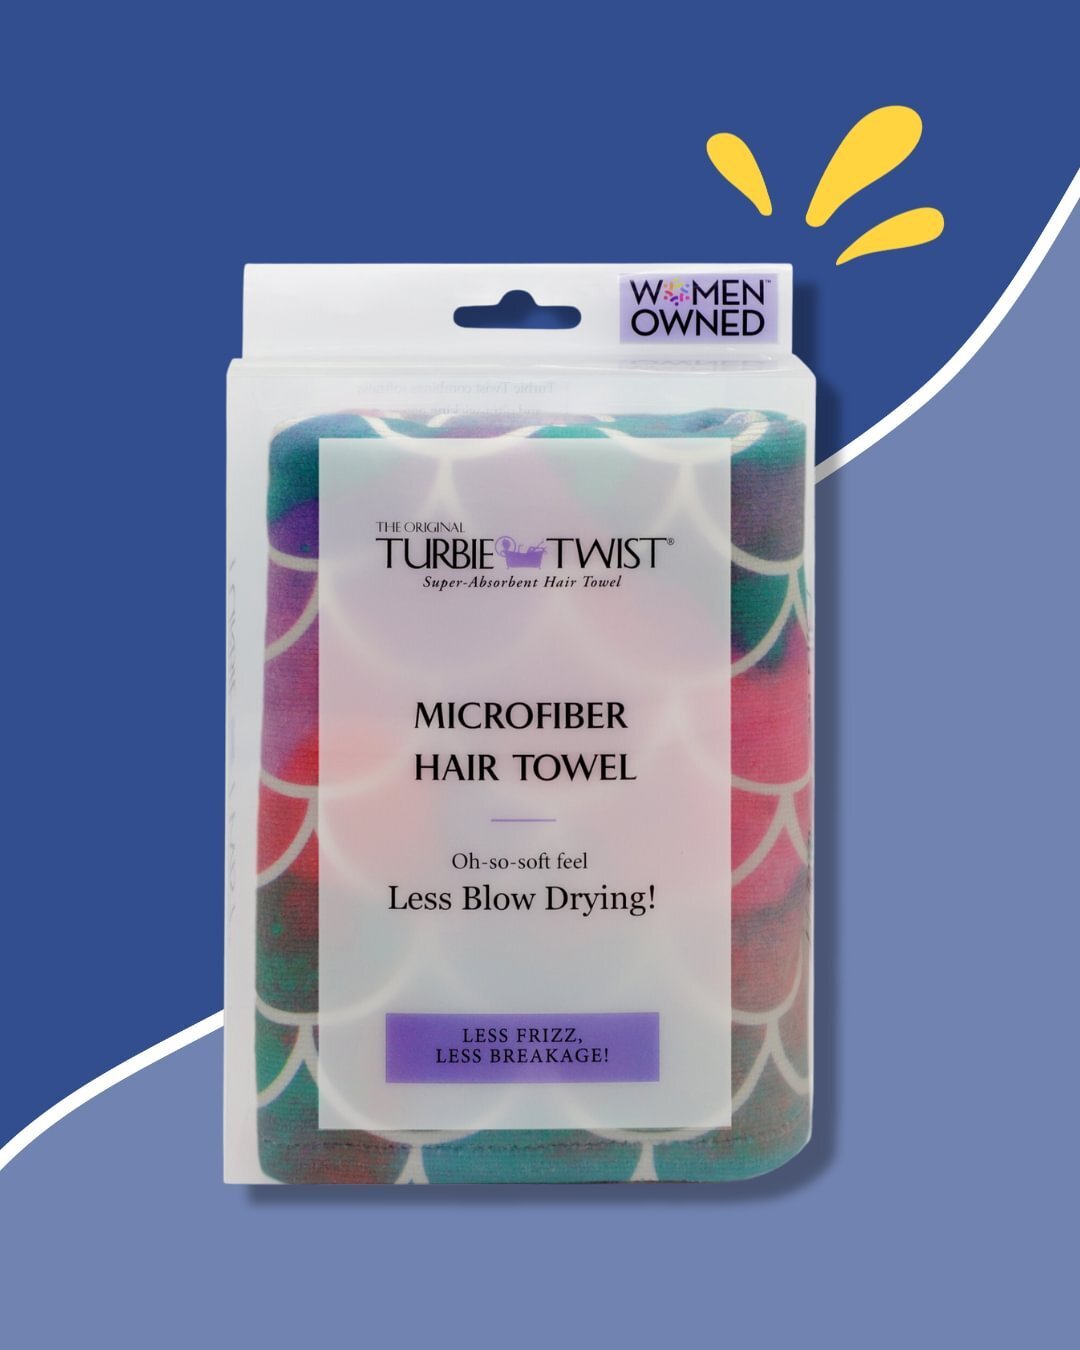 Are you stuck for the PERFECT Mother's Day gift? 💐⁠
⁠
Look no further than the Turbie Twist Microfiber Hair Towel! This amazing towel is a game-changer for drying hair quickly and efficiently, giving mum more time to do the things she loves.⁠
⁠
Why 